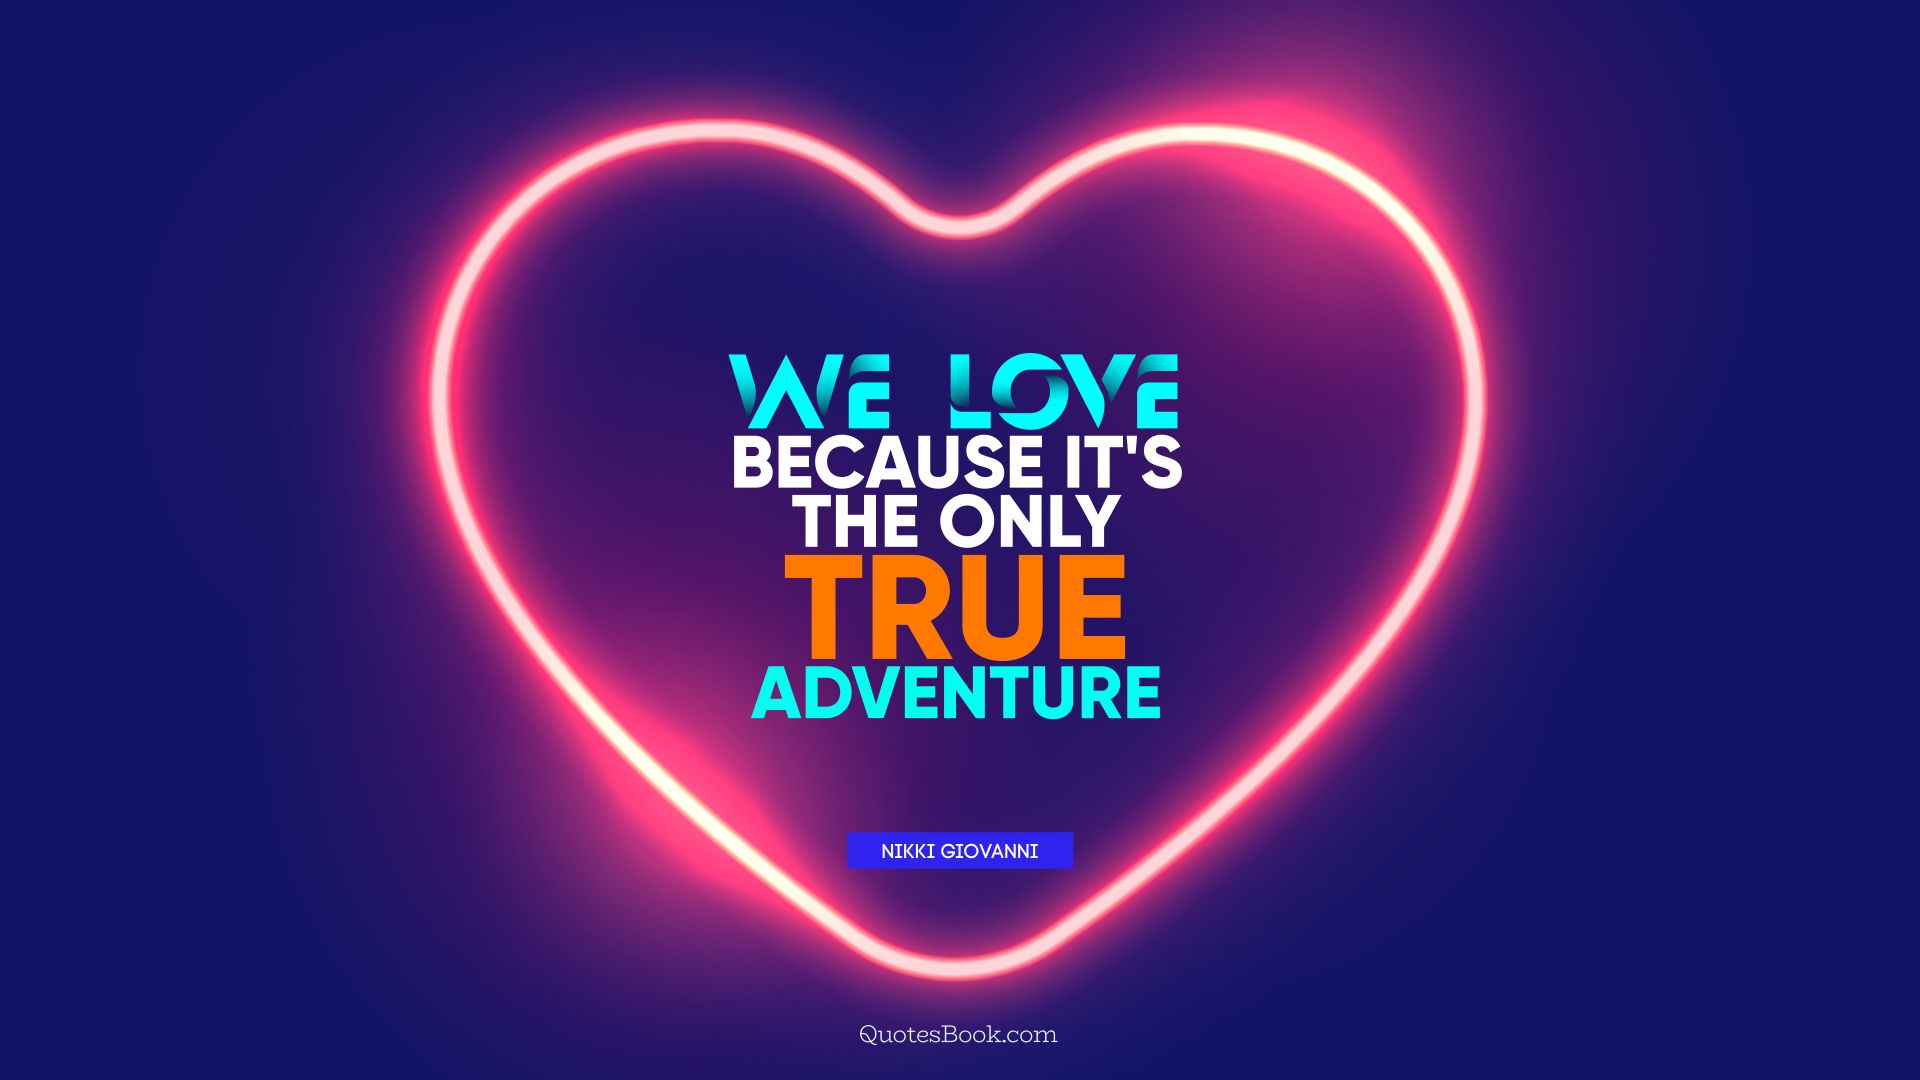 We love because it's the only true adventure